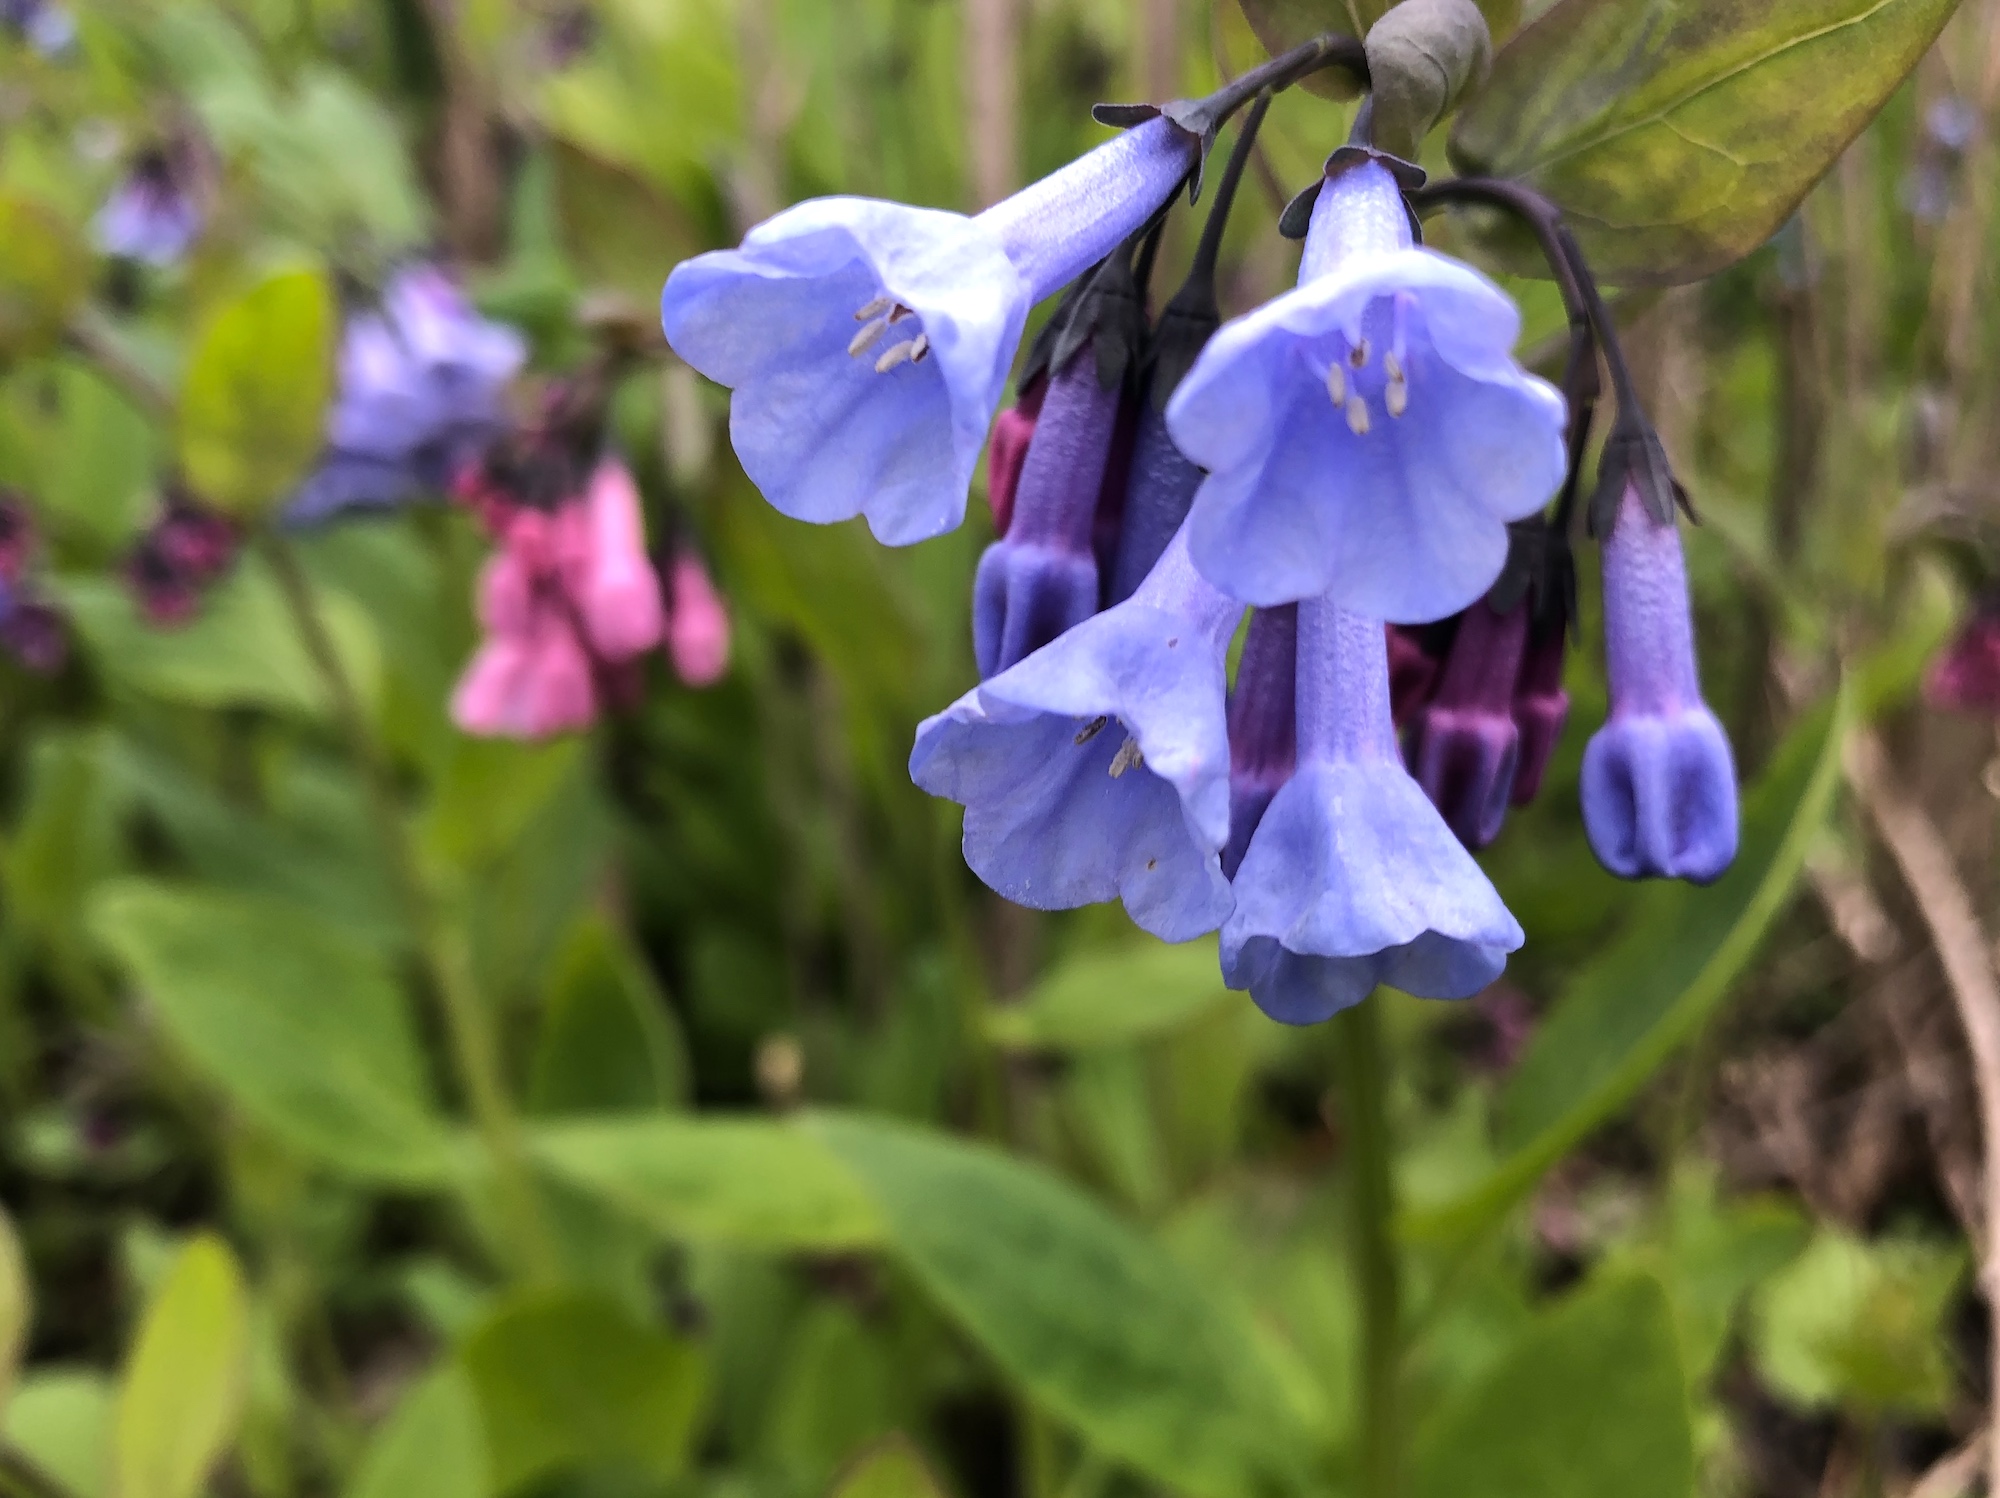 Virginia Bluebells in woods between Marion Dunn and Oak Savanna in Madison, Wisconsin on April 25, 2020.